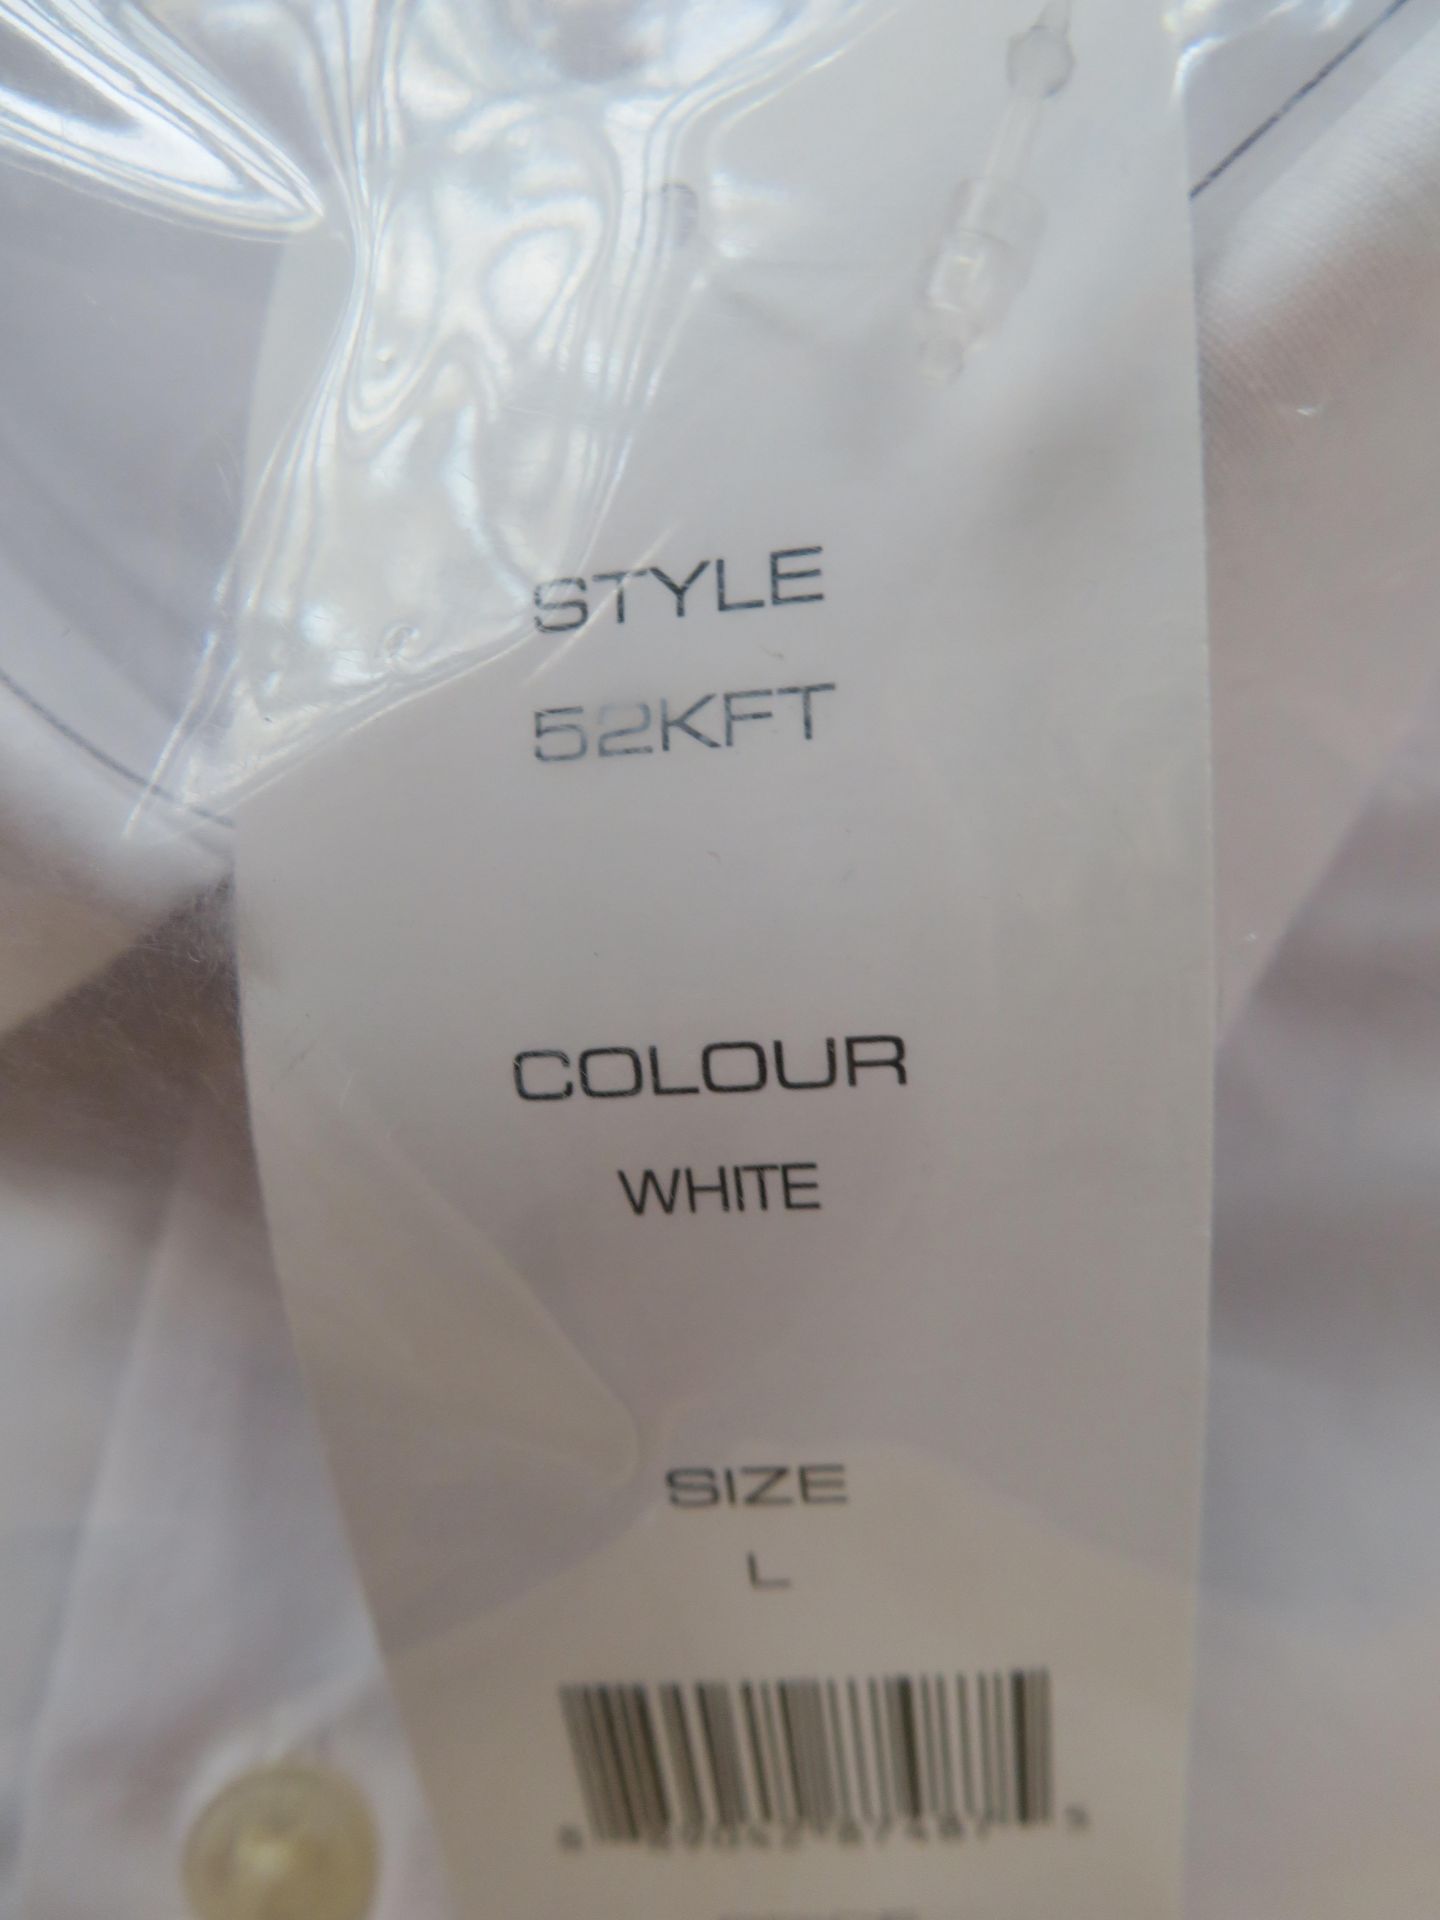 20 x Brand New French Connection Formal White Long Sleeve Shirts in Various Sizes. Huge Re-Sale - Image 4 of 4